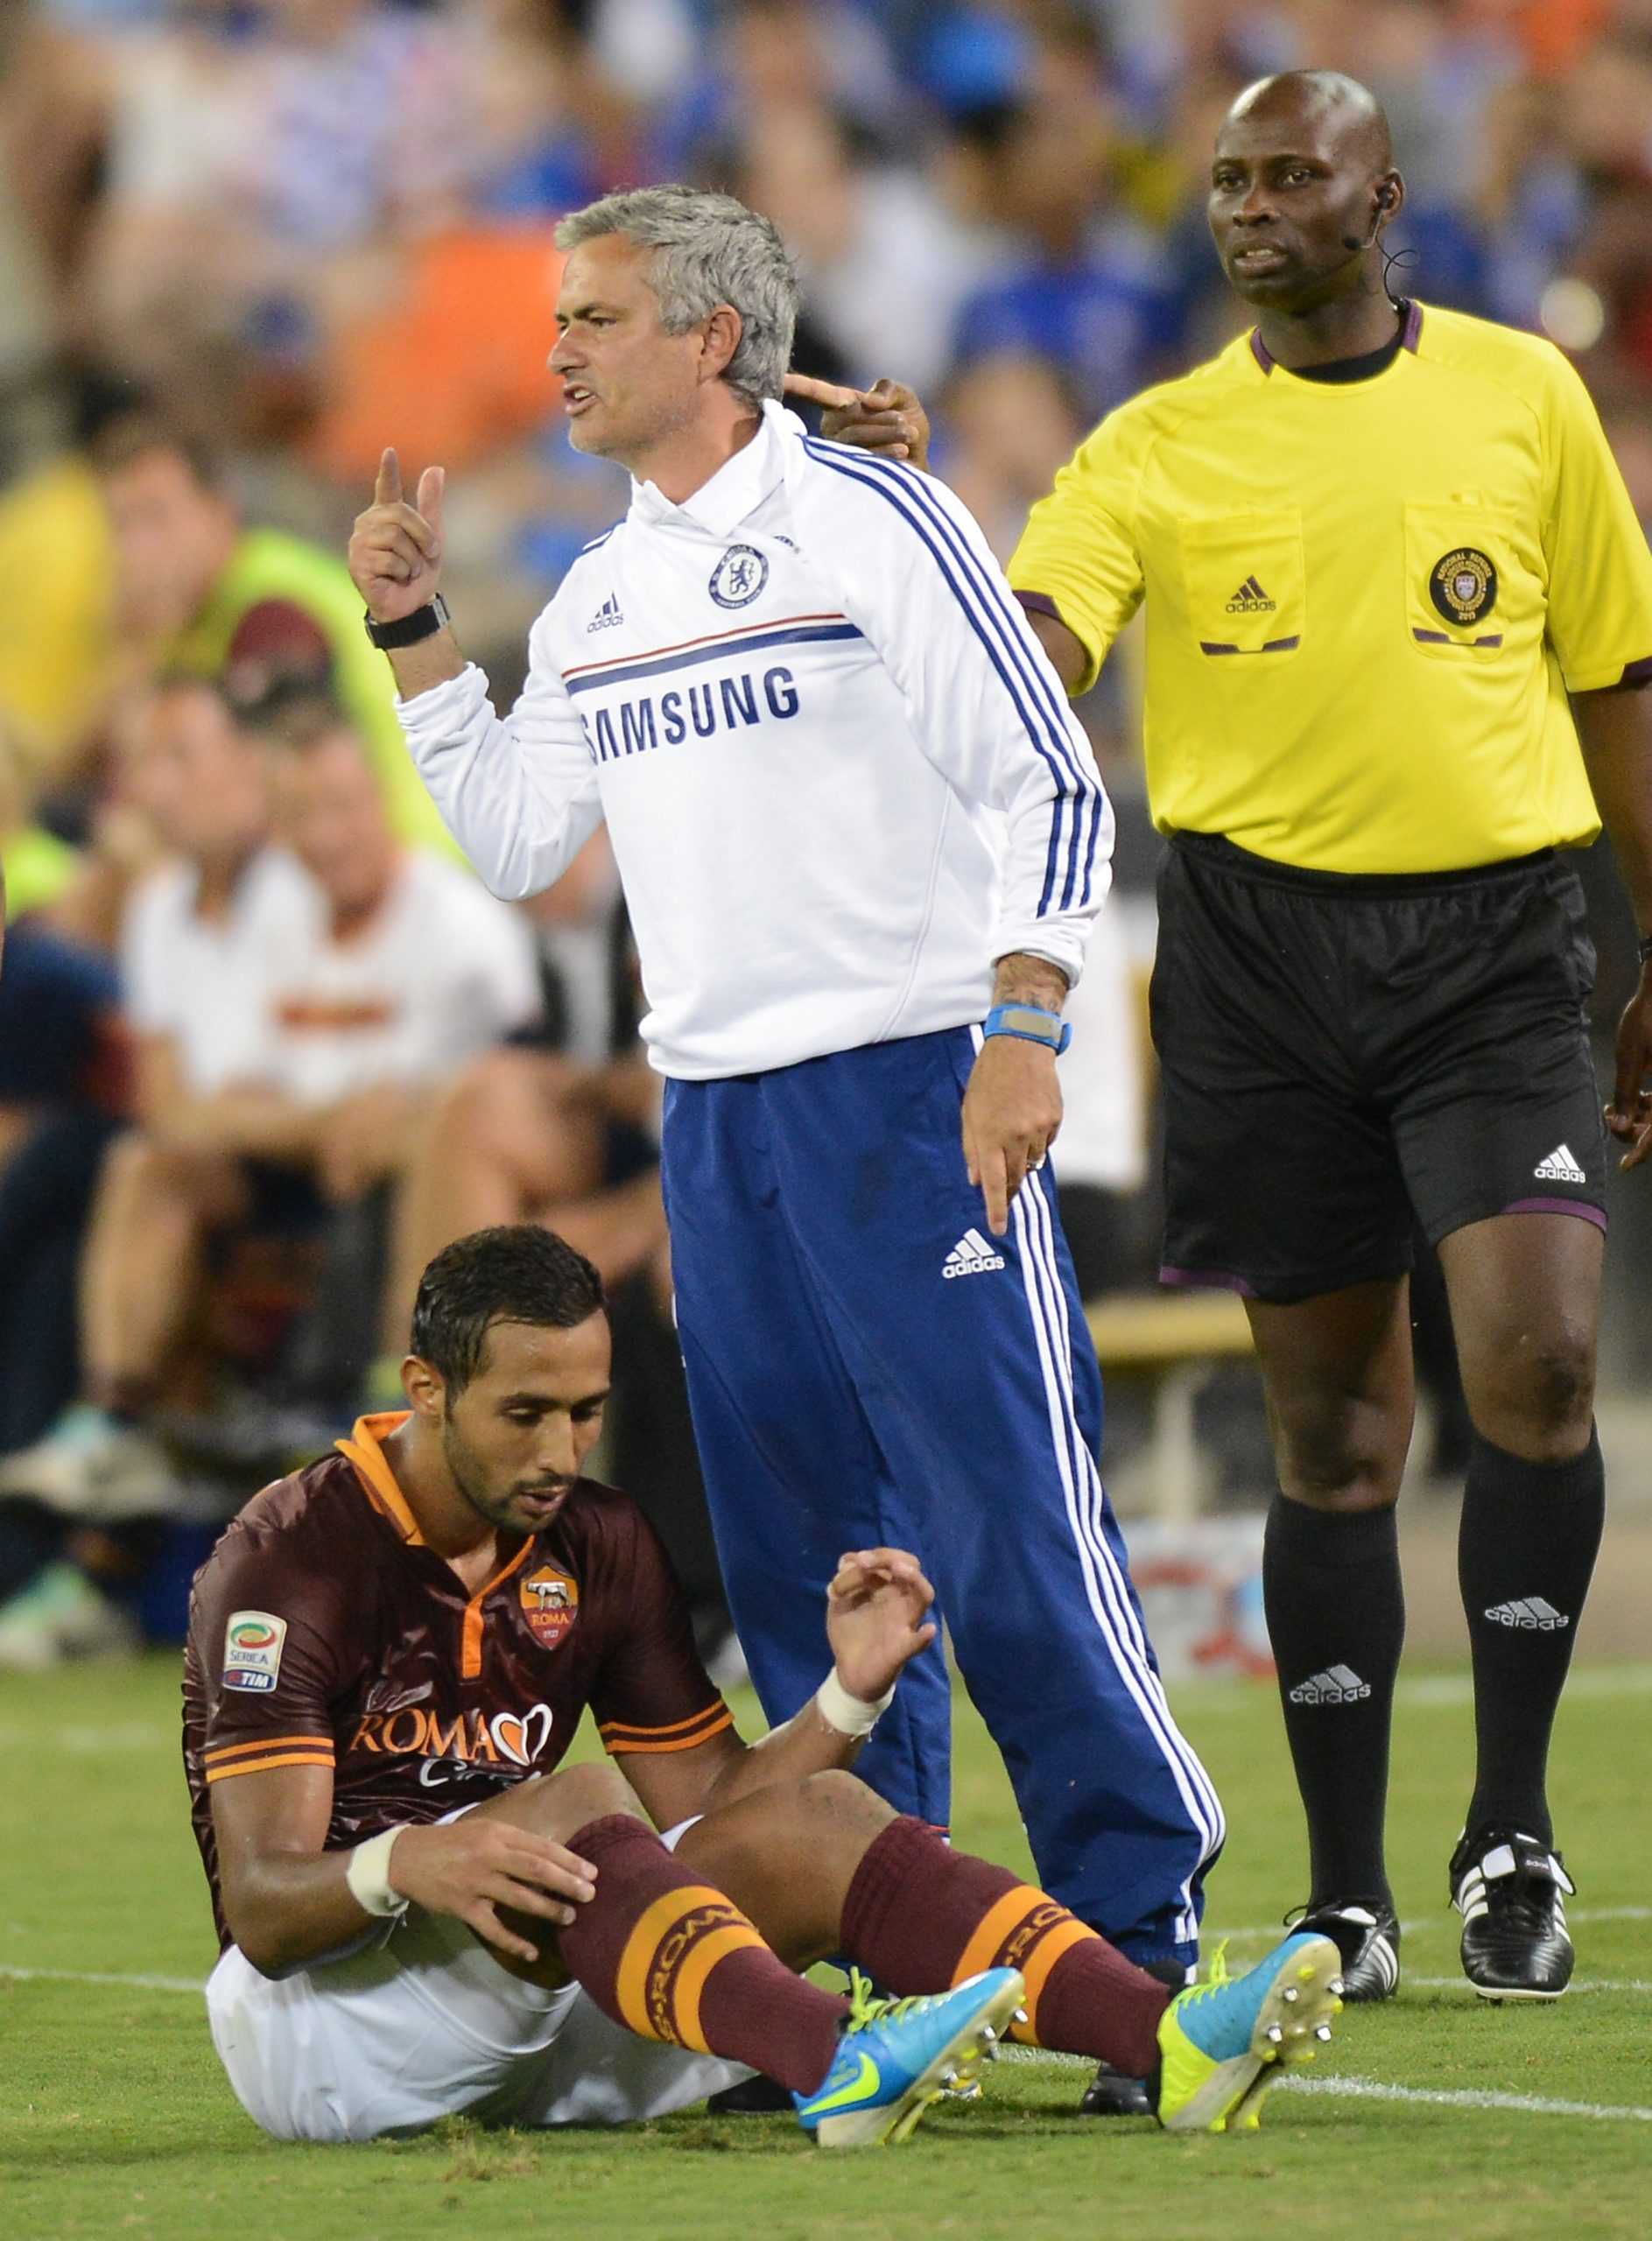 Chelsea FC coach Jose Mourinho signals to his players as AS Roma forward Mehdi Denatia (17) sits on the pitch below him in the second half of an internationals friendly at RFK Stadium in Washington, D.C., Saturday, August 10, 2013. Chelsea defeated Roma 2-1. (Chuck Myers/MCT)